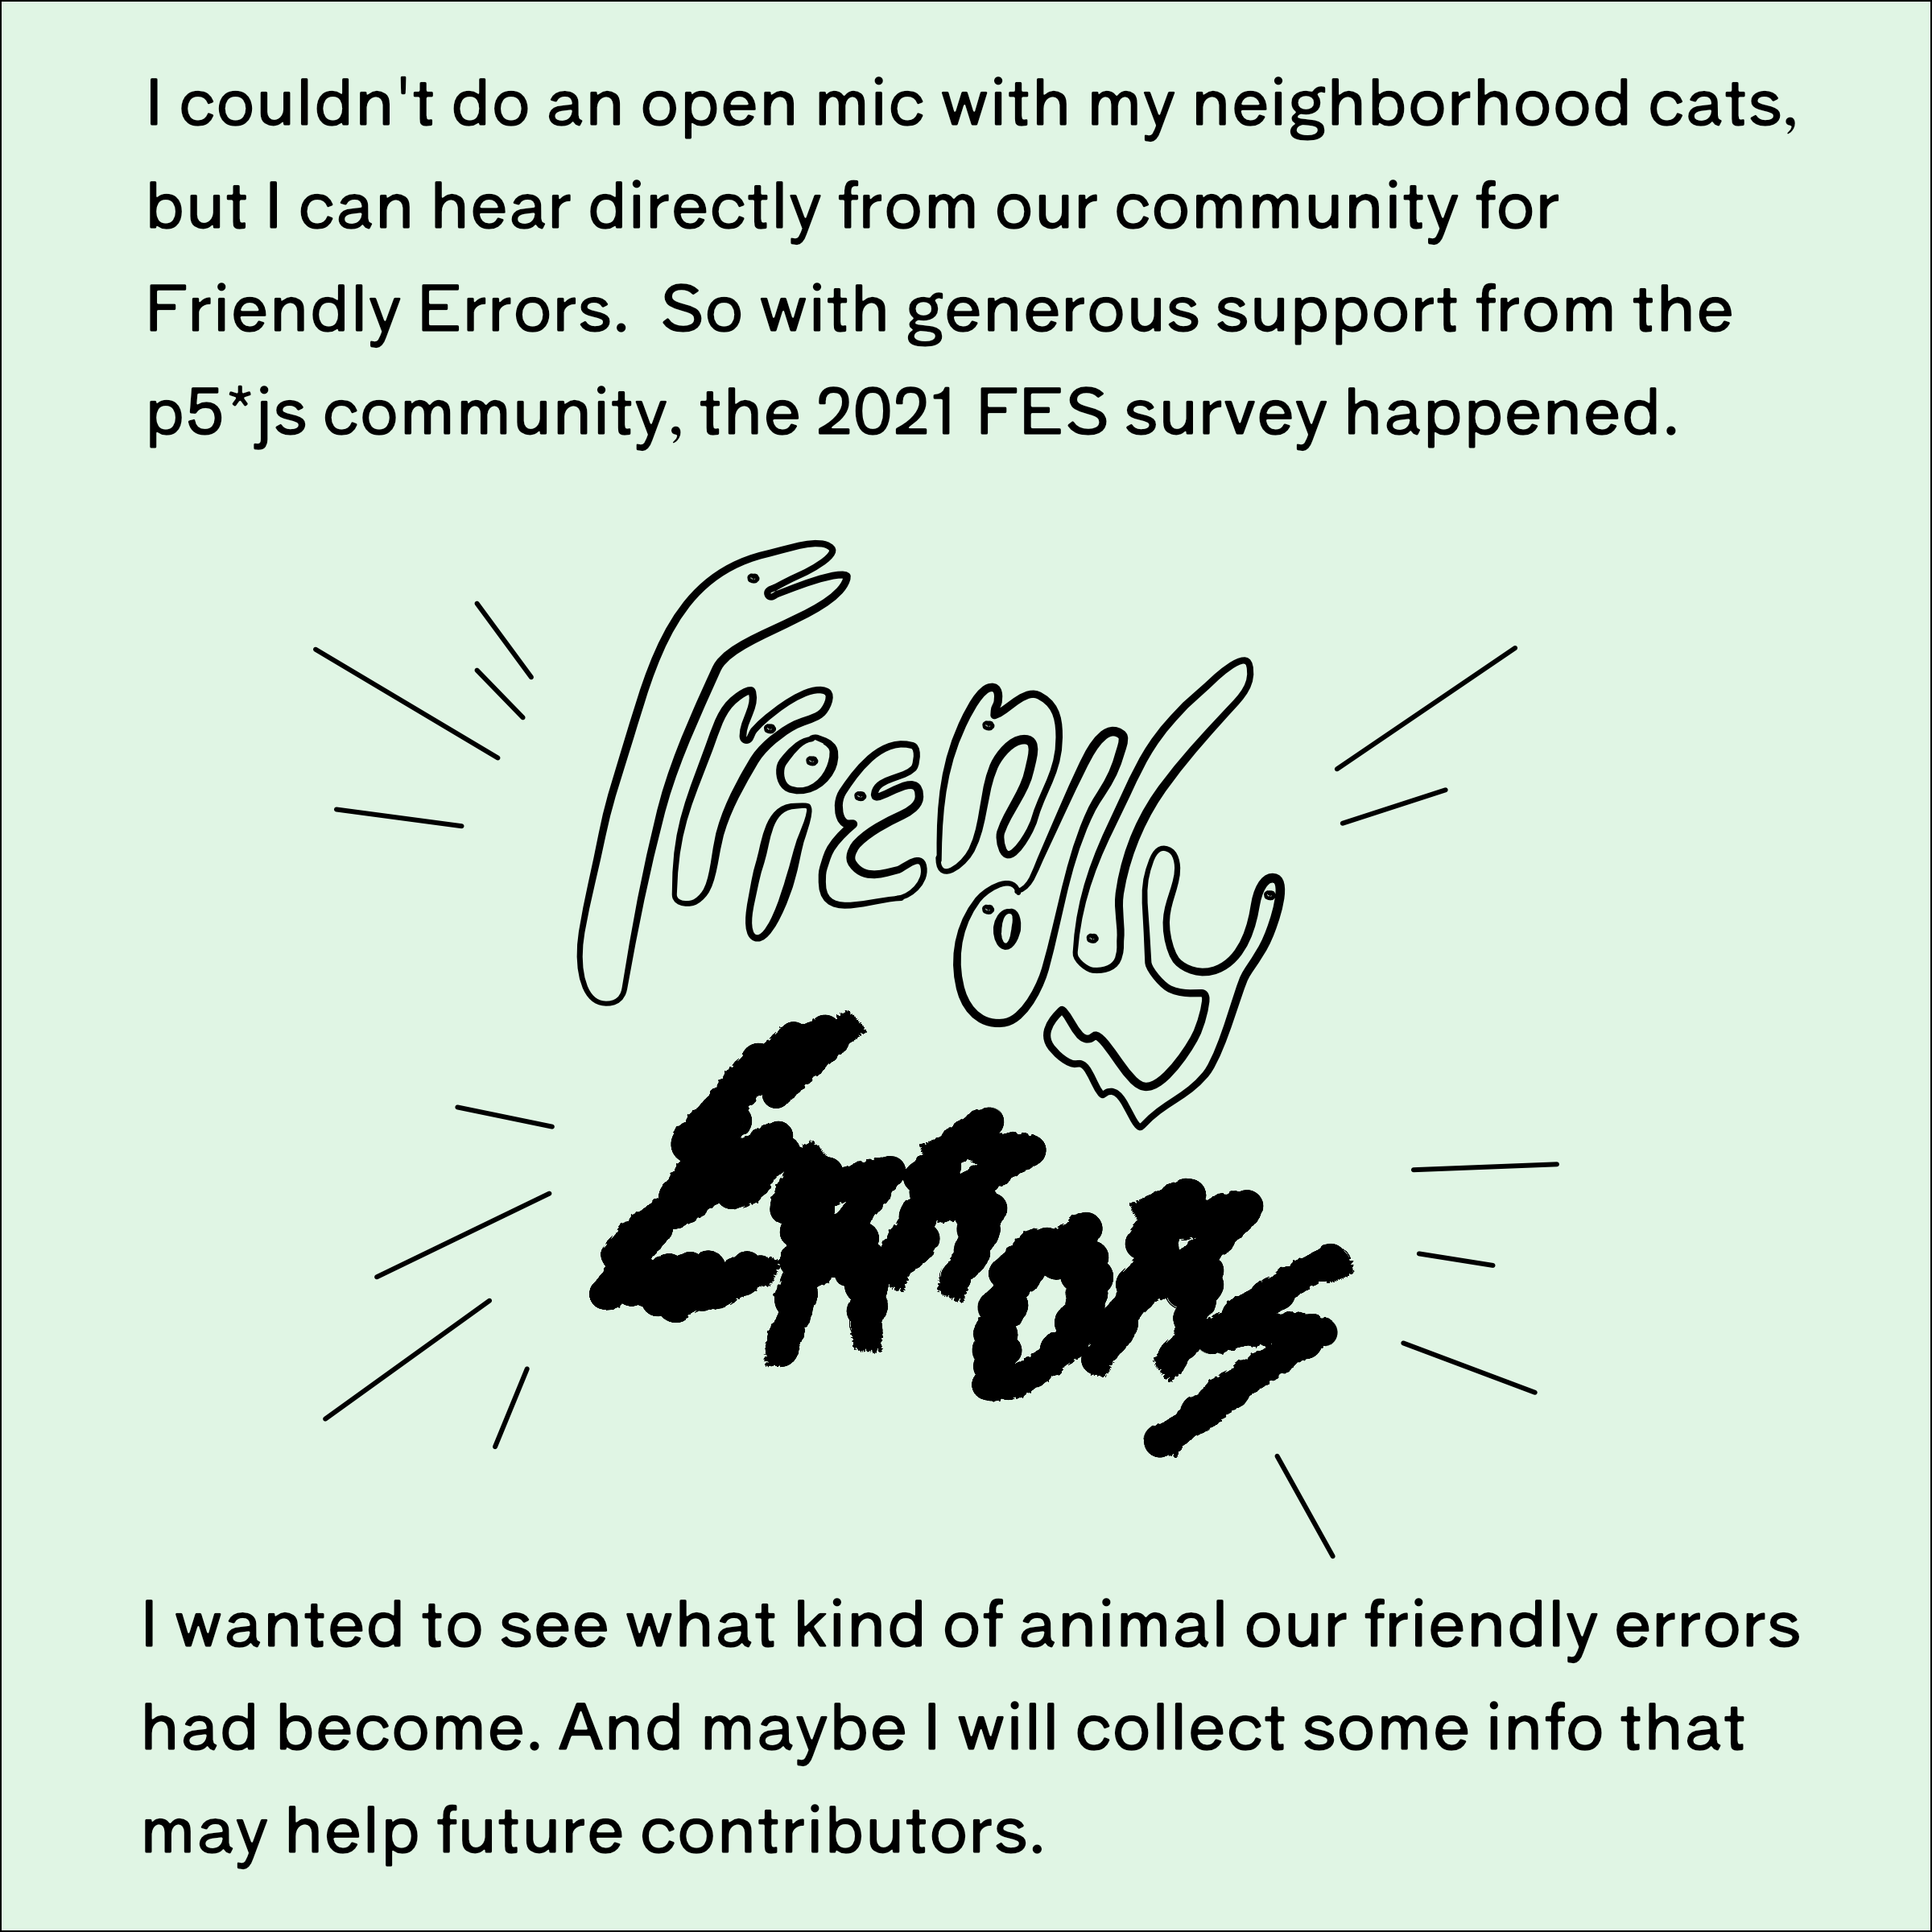 I couldn't do an open mic with my neighborhood cats, but I could hear directly from our community for Friendly Errors. So with generous support from the p5*js community, the 2021 FES survey happened. I wanted to see what kind of animal our friendly errors had become. And maybe I will collect some info that may help future contributors.